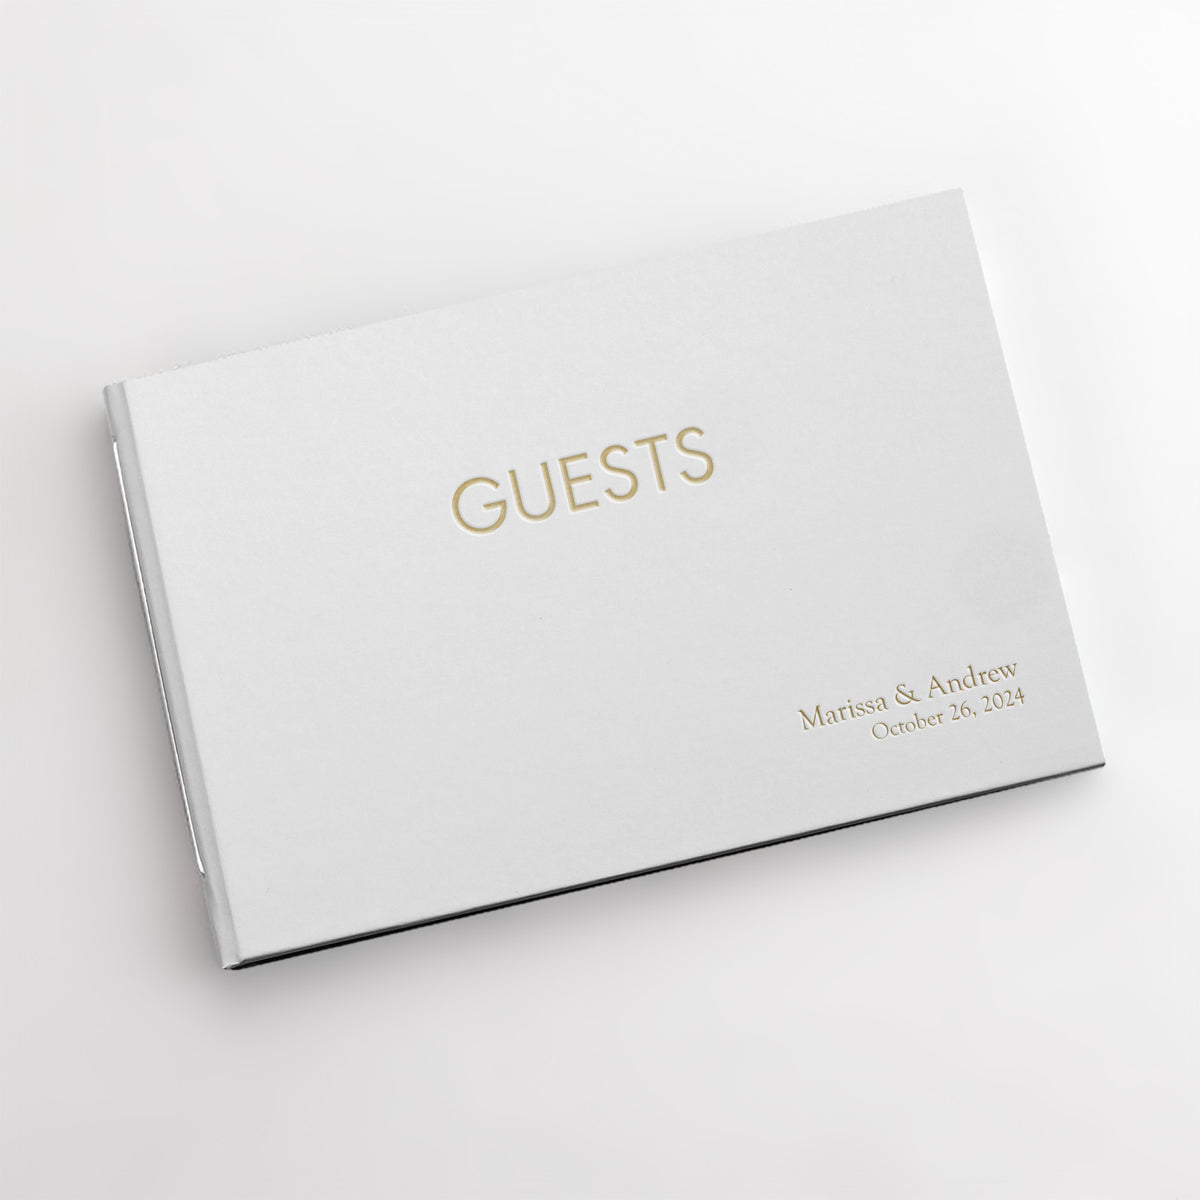 Guestbook Embossed with “Guests” with White Vegan Leather Cover